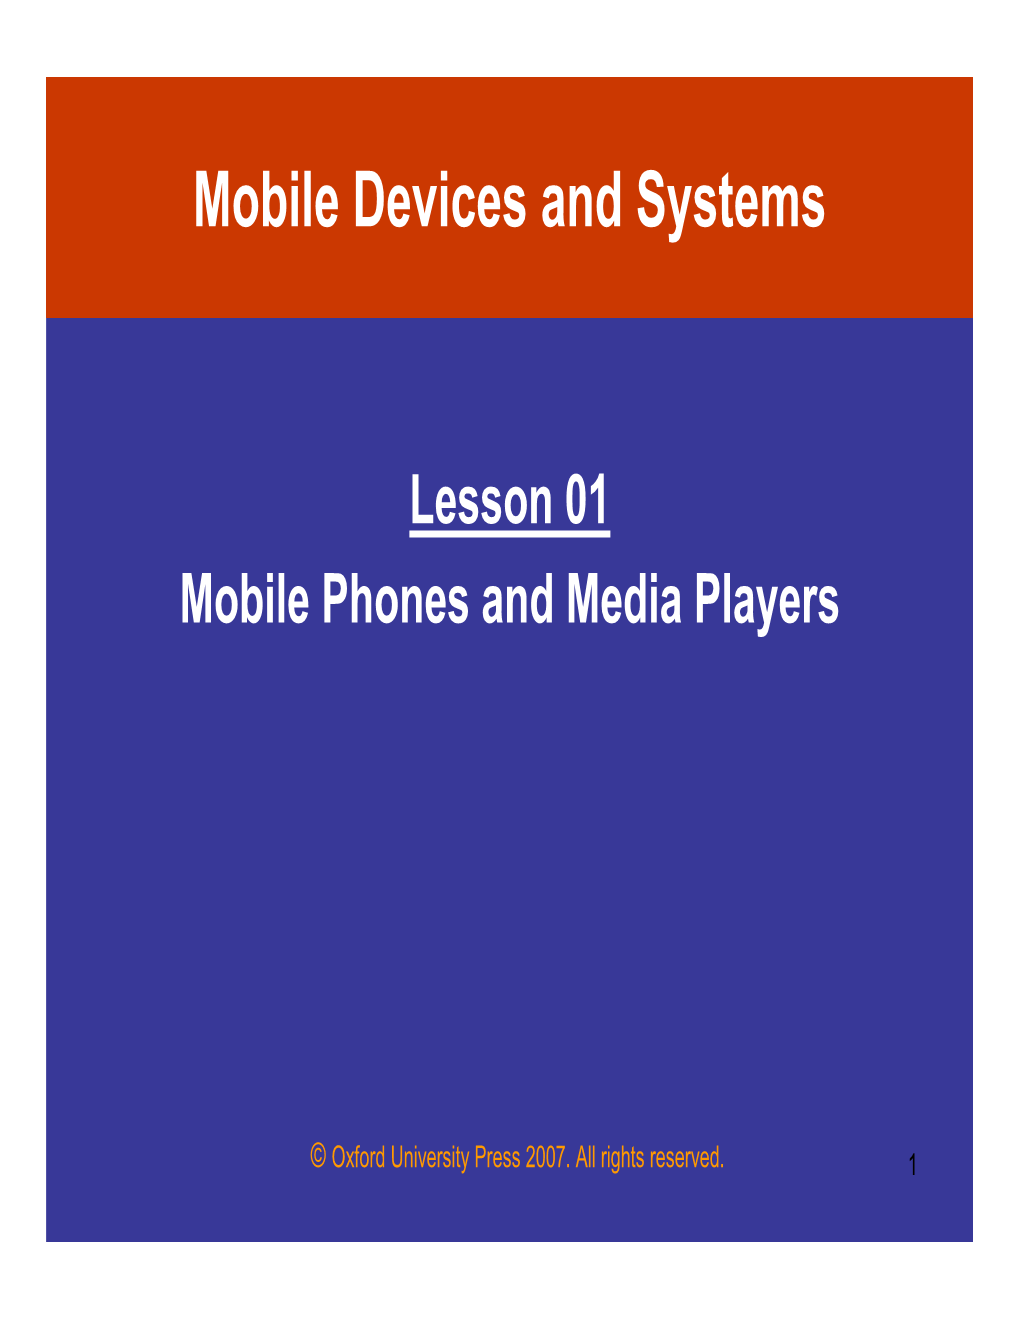 Mobile Phones and Media Players